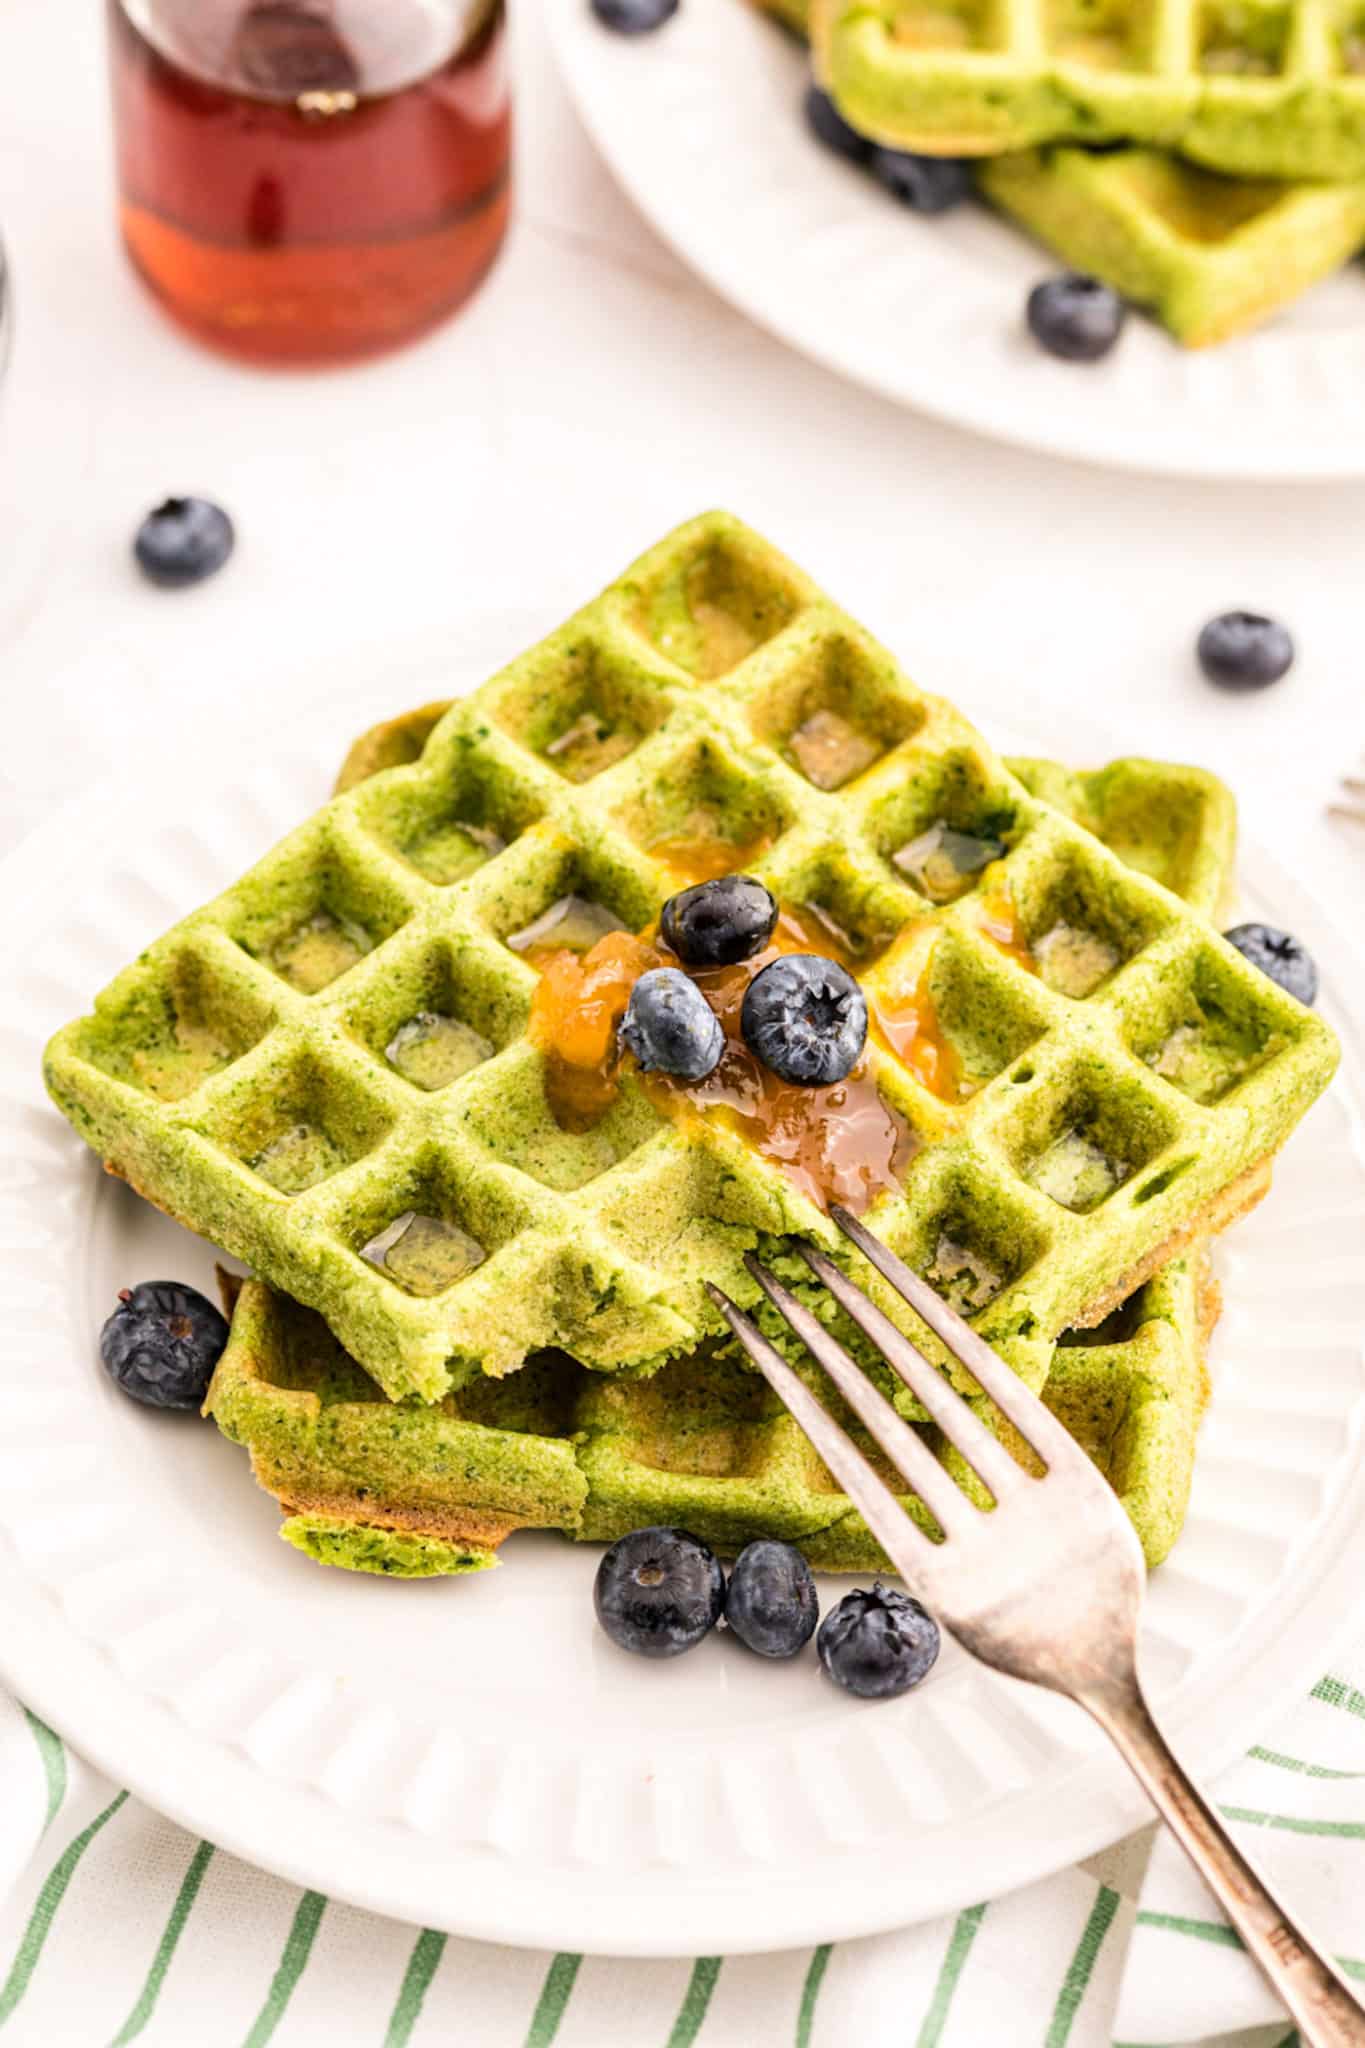 Green Waffles are a fun treat to serve for St. Patrick’s Day, Christmas, or Earth Day. Baby spinach adds color and is a sneaky way to add nutrition to this classic breakfast dish. Be sure to serve this fun and healthy green food to your loved ones. Everyone loves these healthy gluten-free waffles. 